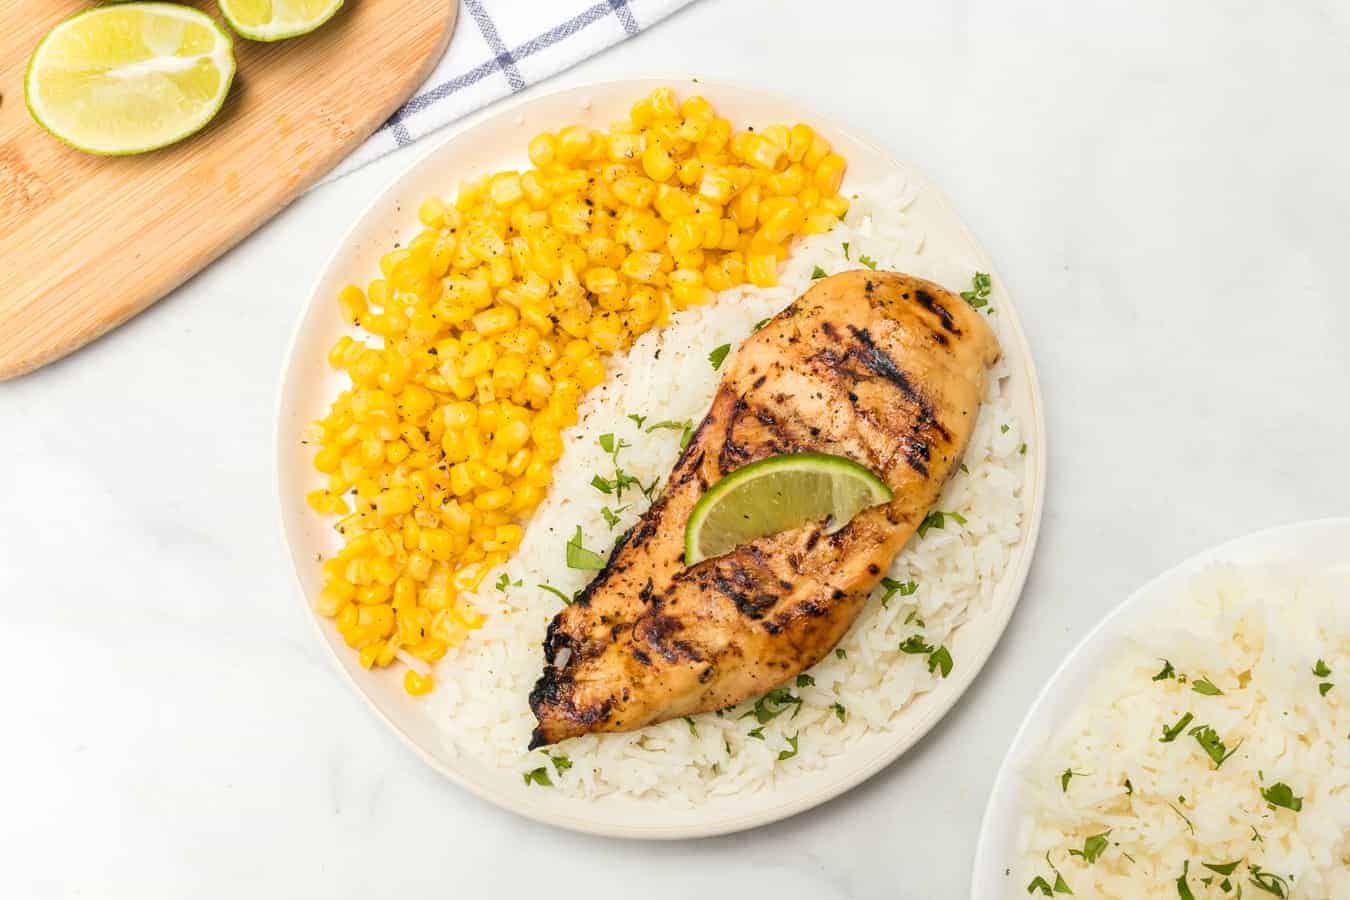 Grilled honey lime chicken breast is bright, sweet, and smoky, and is just as delicious on its own as a main dish as it is on top of salads, tacos, or anything else!